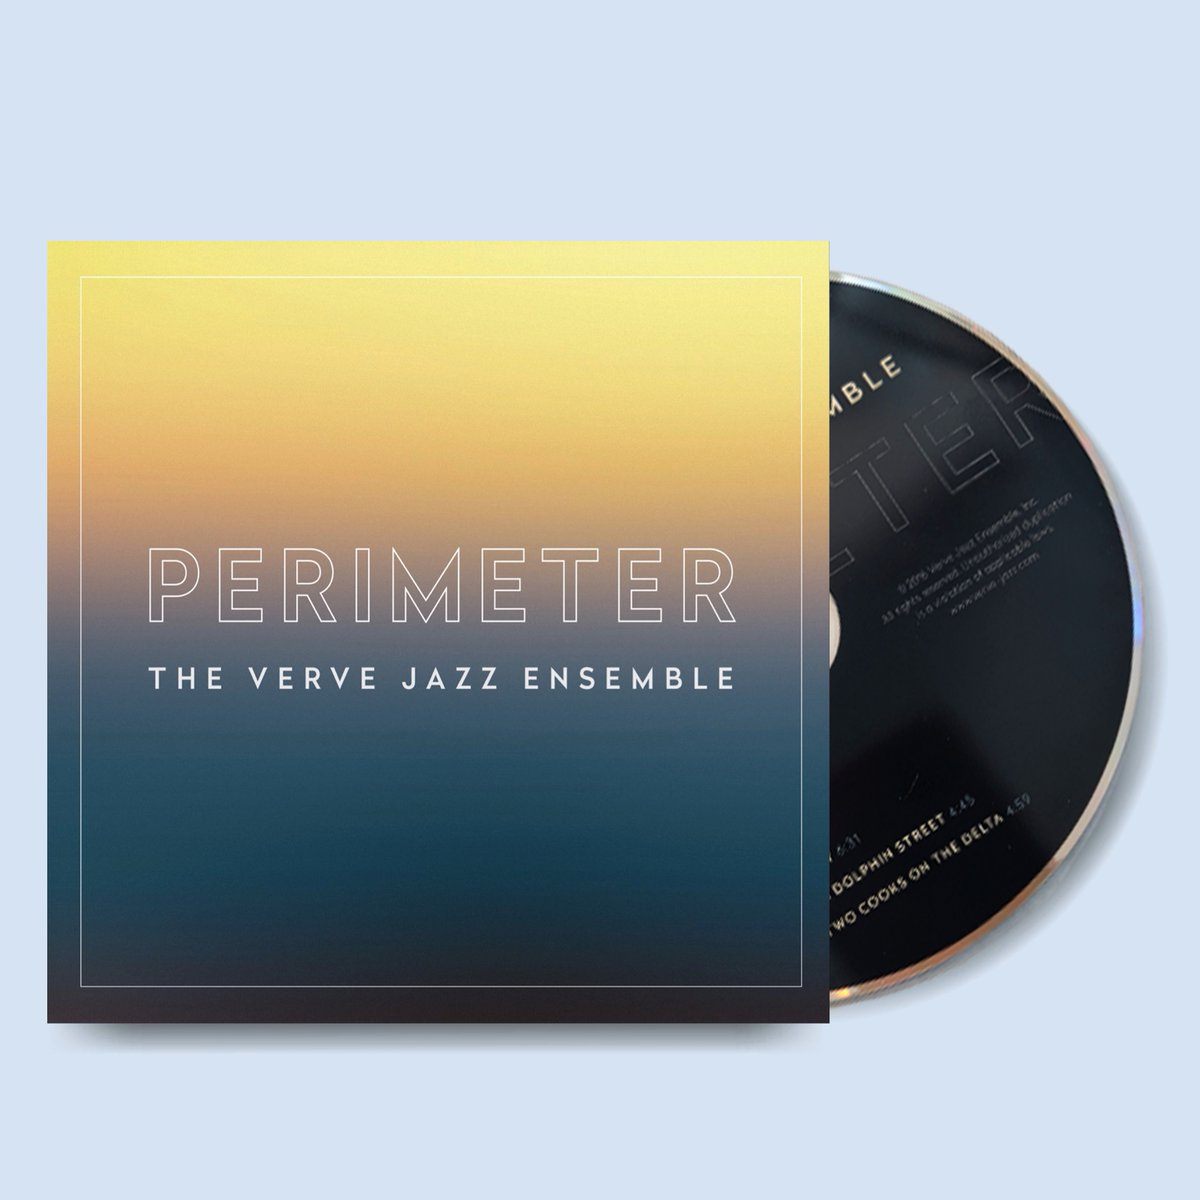 #TBT - Looking back to 2016 to 'Perimeter'🎵🕰️
Take a listen: open.spotify.com/album/034AJQ9n…

#jazz #jazzmusic #band #music #musician #musician #musicislife #musicians #musiclife #musiclovers #musicismylife  #TheVerveJazzEnsemble